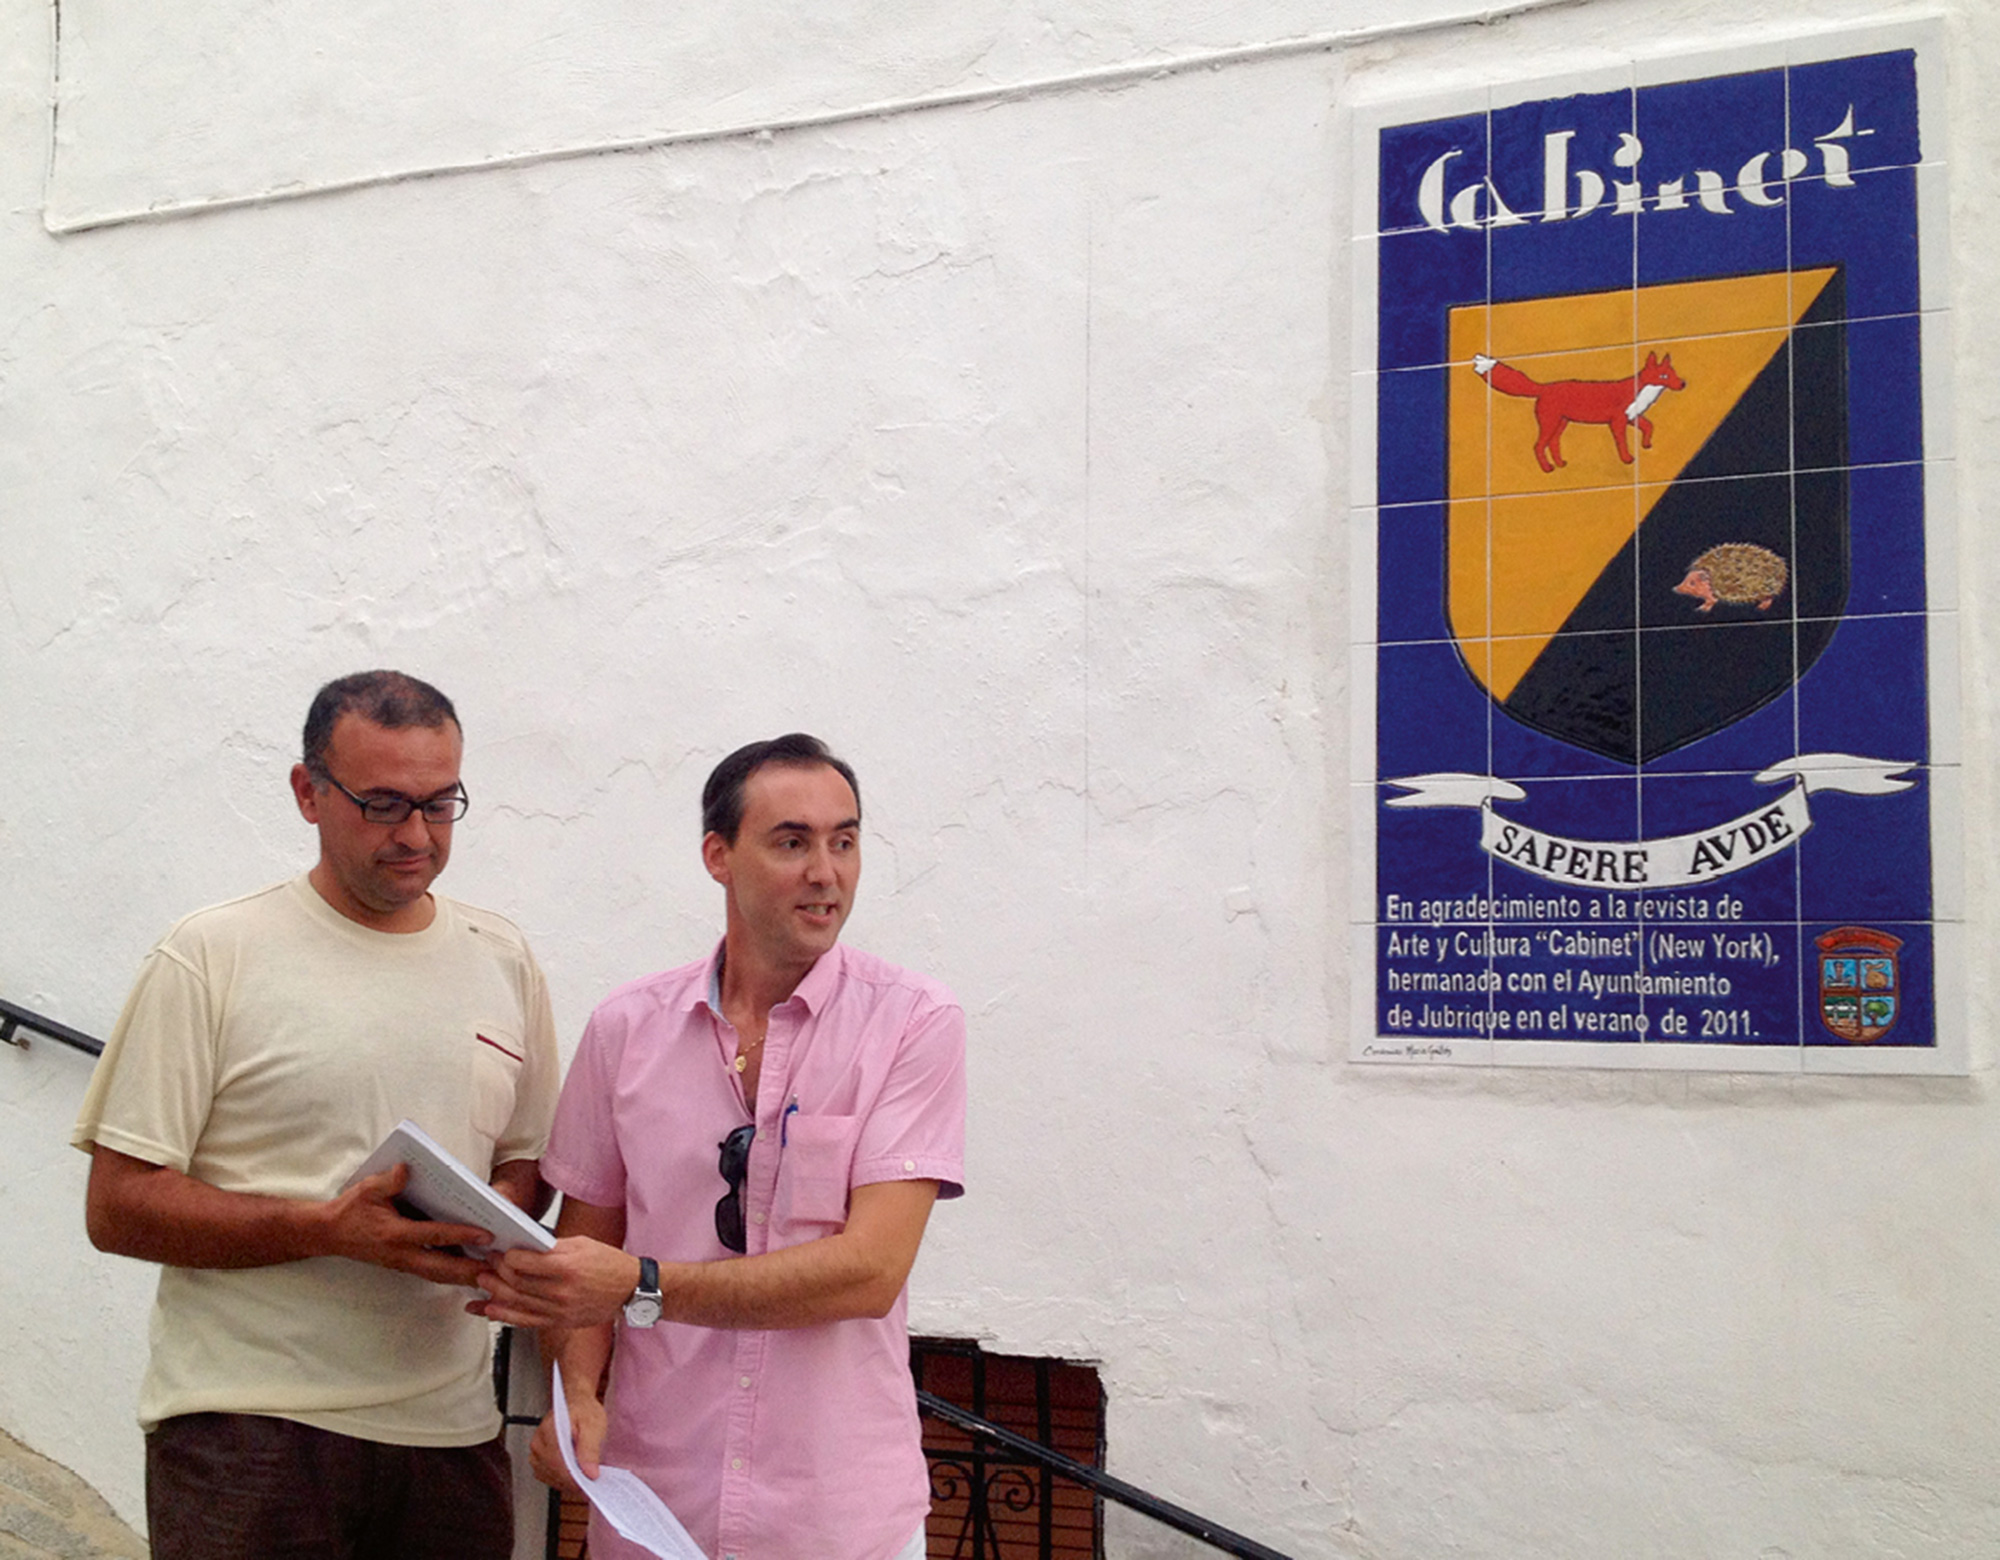 A photograph of Jubrique’s mayor David Sanchez and deputy mayor Paco Jesus as they inaugurate the ceramic plaque.